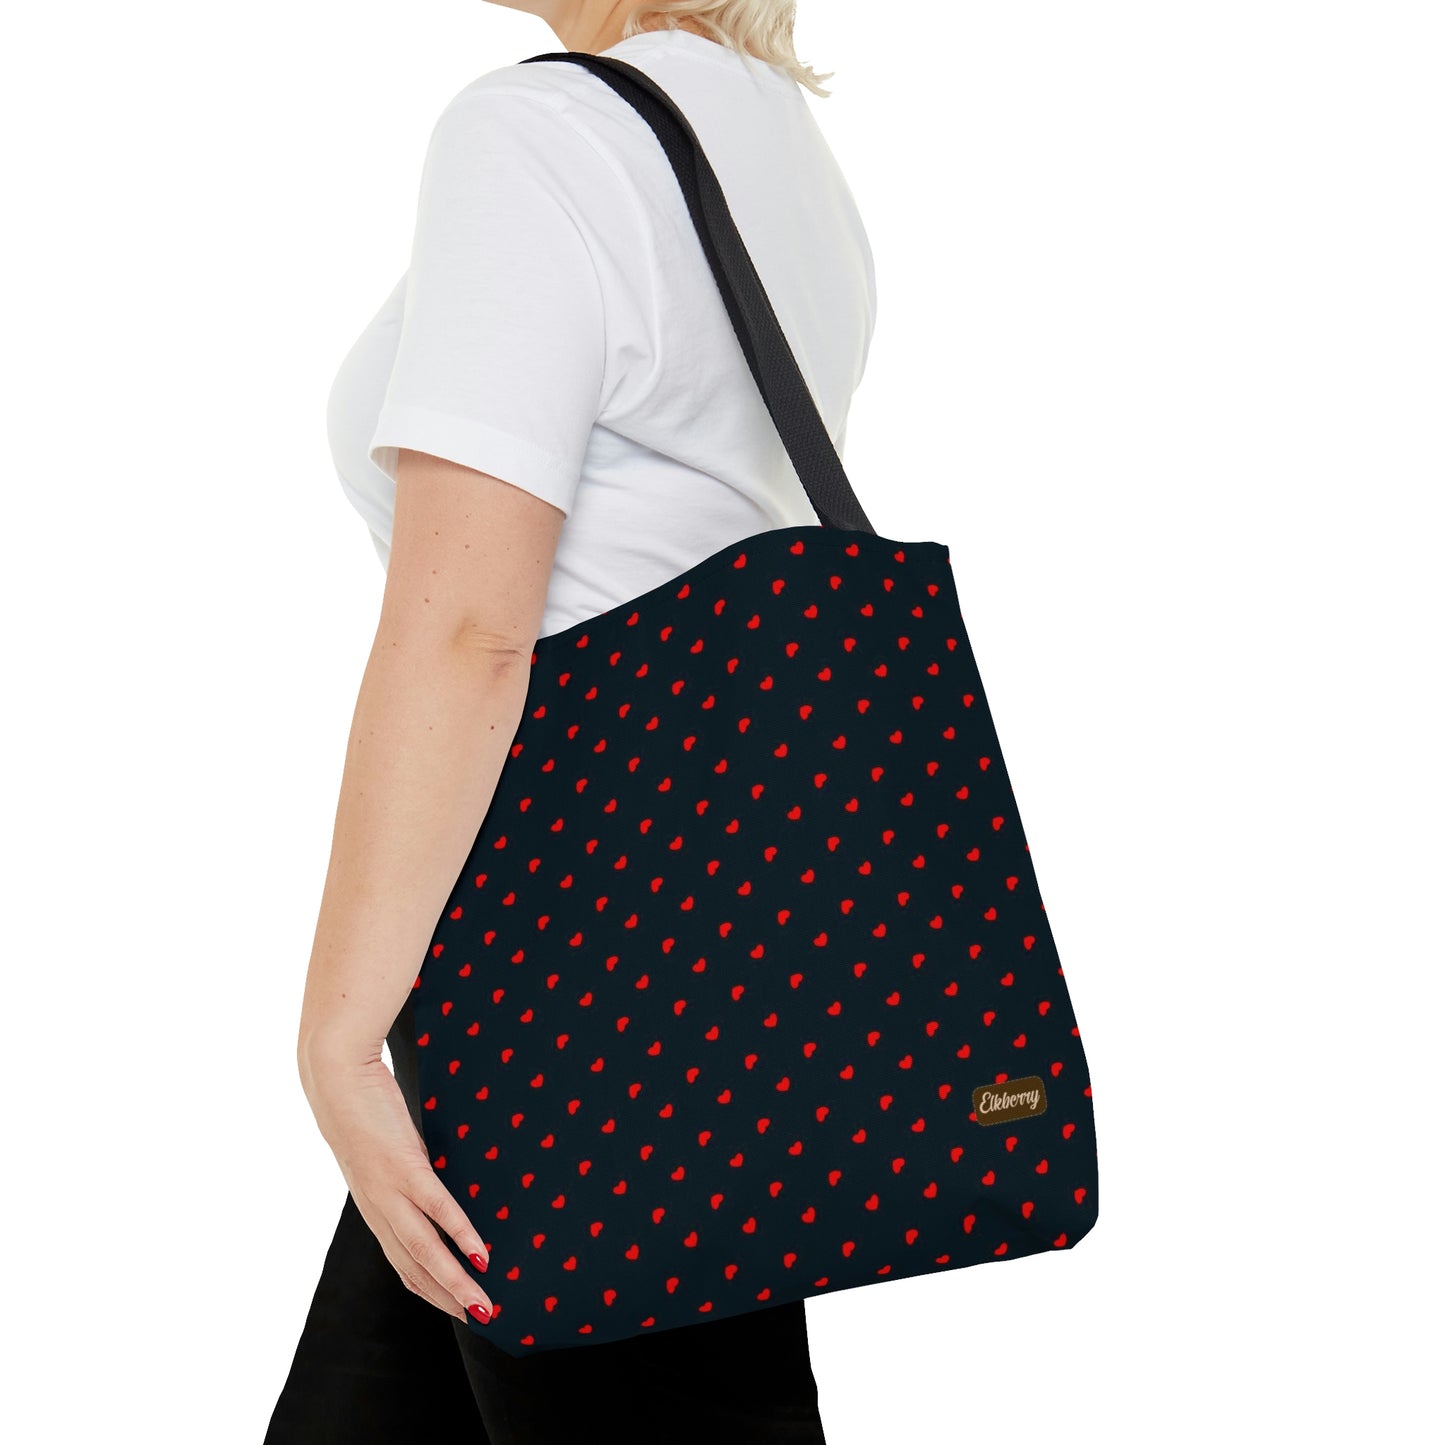 Lightweight Tote Bag - Red Hearts on Navy